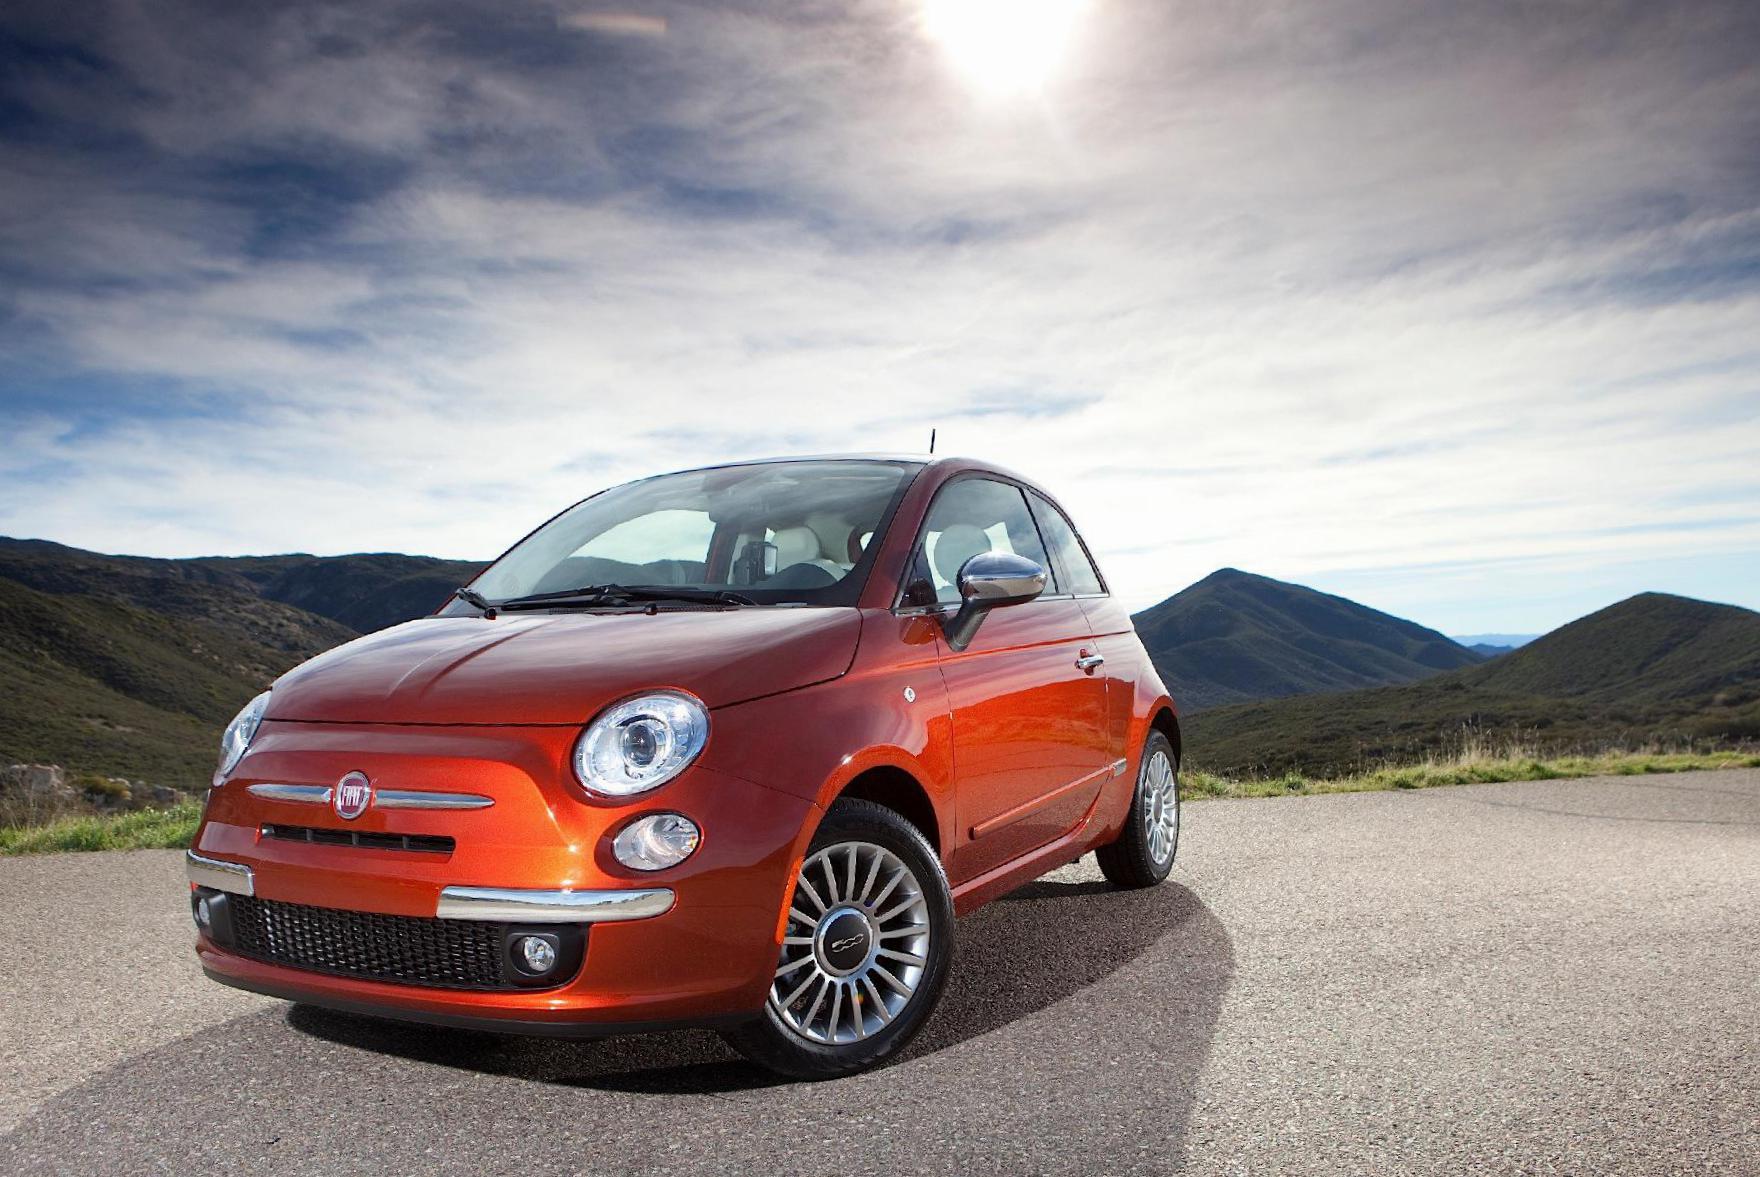 Fiat 500 Photos and Specs. Photo Fiat 500 tuning and 21